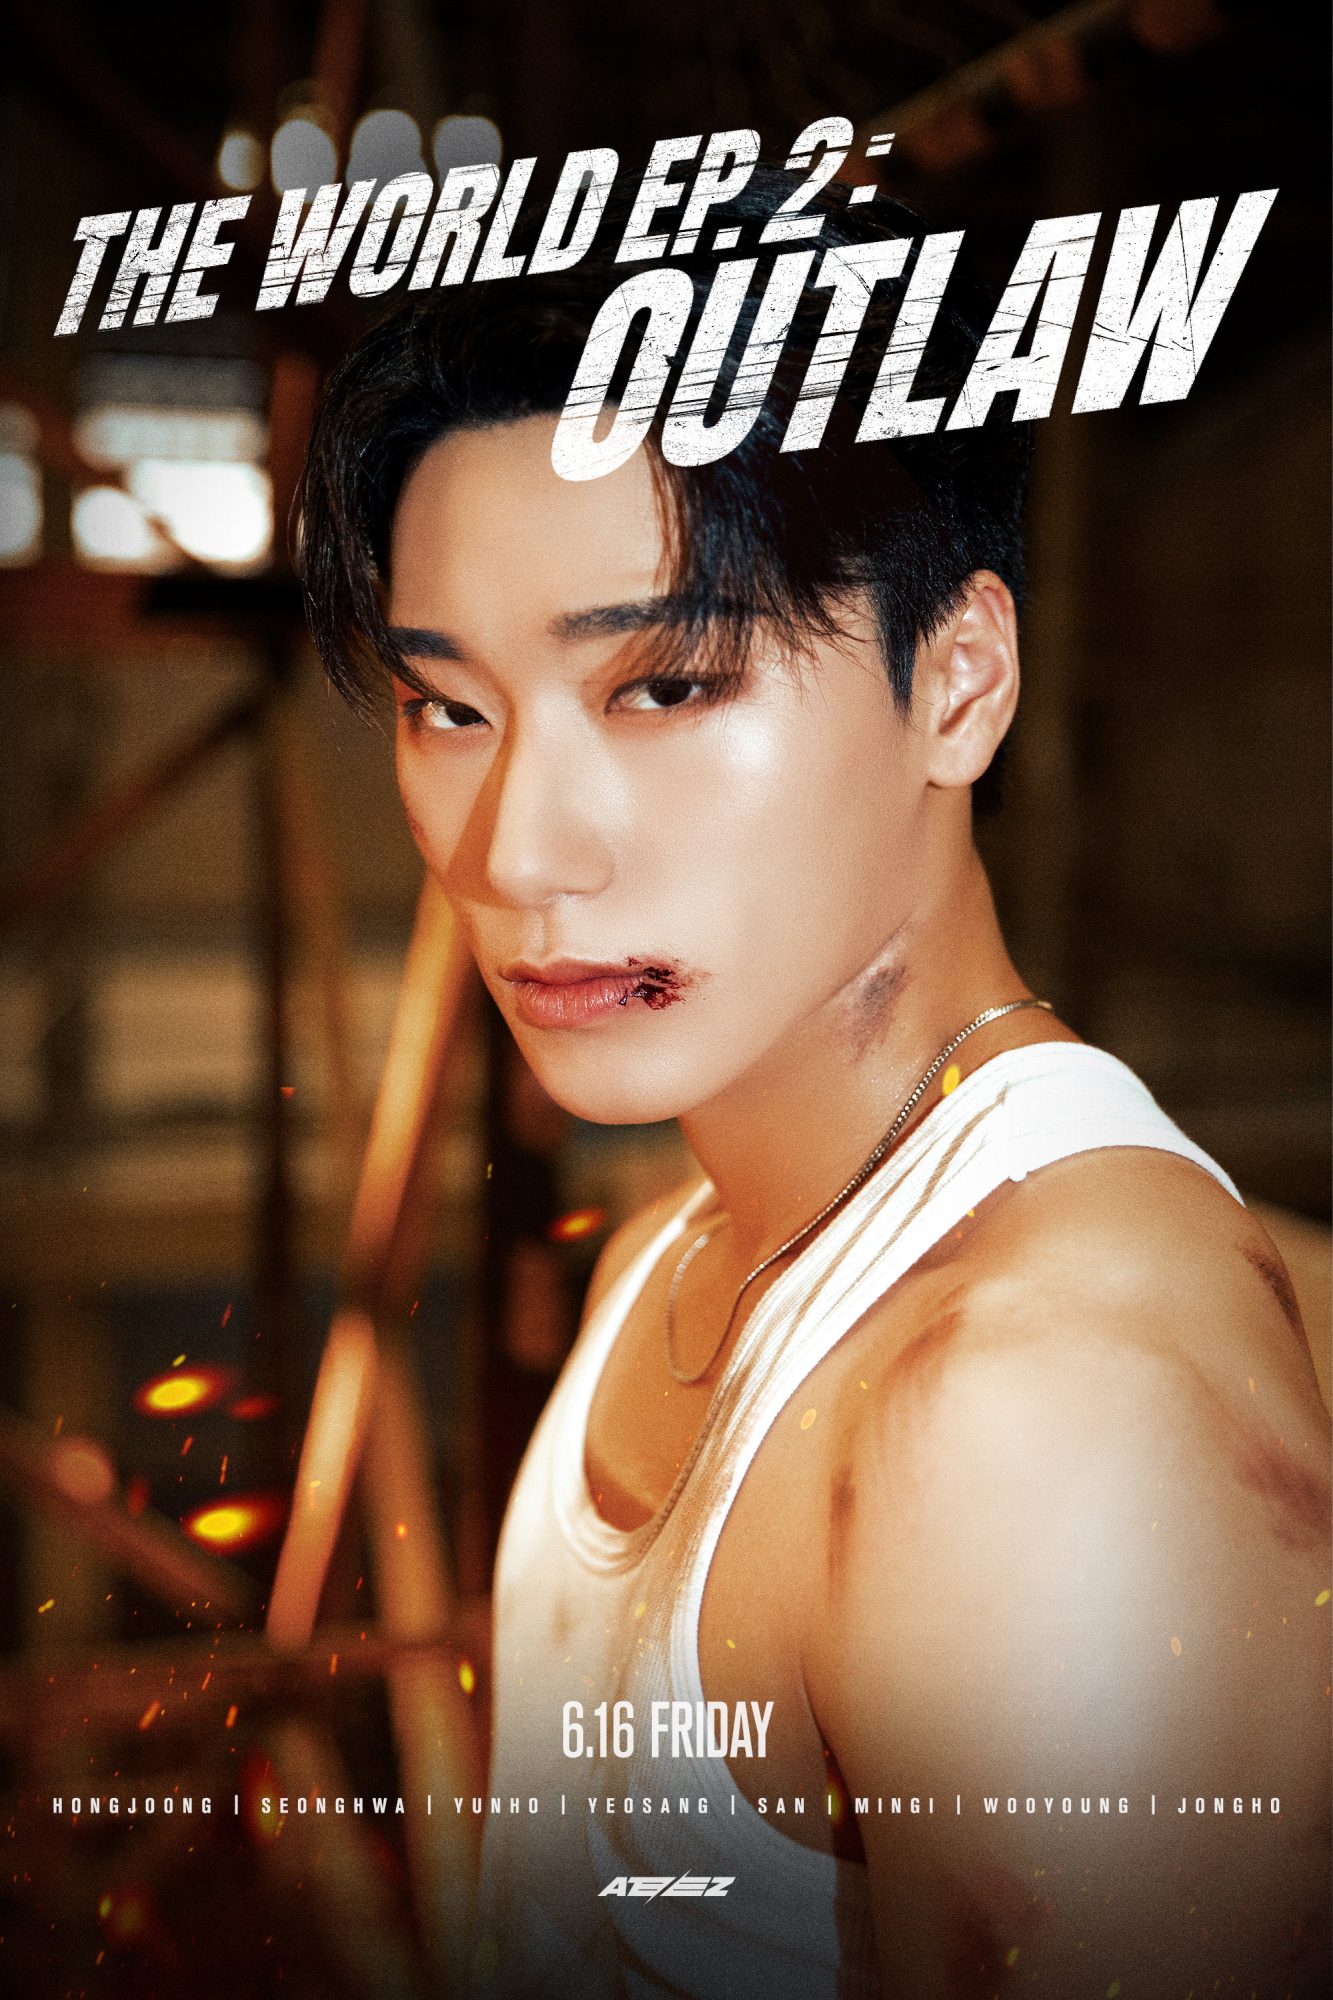 ateez-the-world-ep-2-outlaw-teaser-1-character-posters-hd-hq-k-pop-database-dbkpop